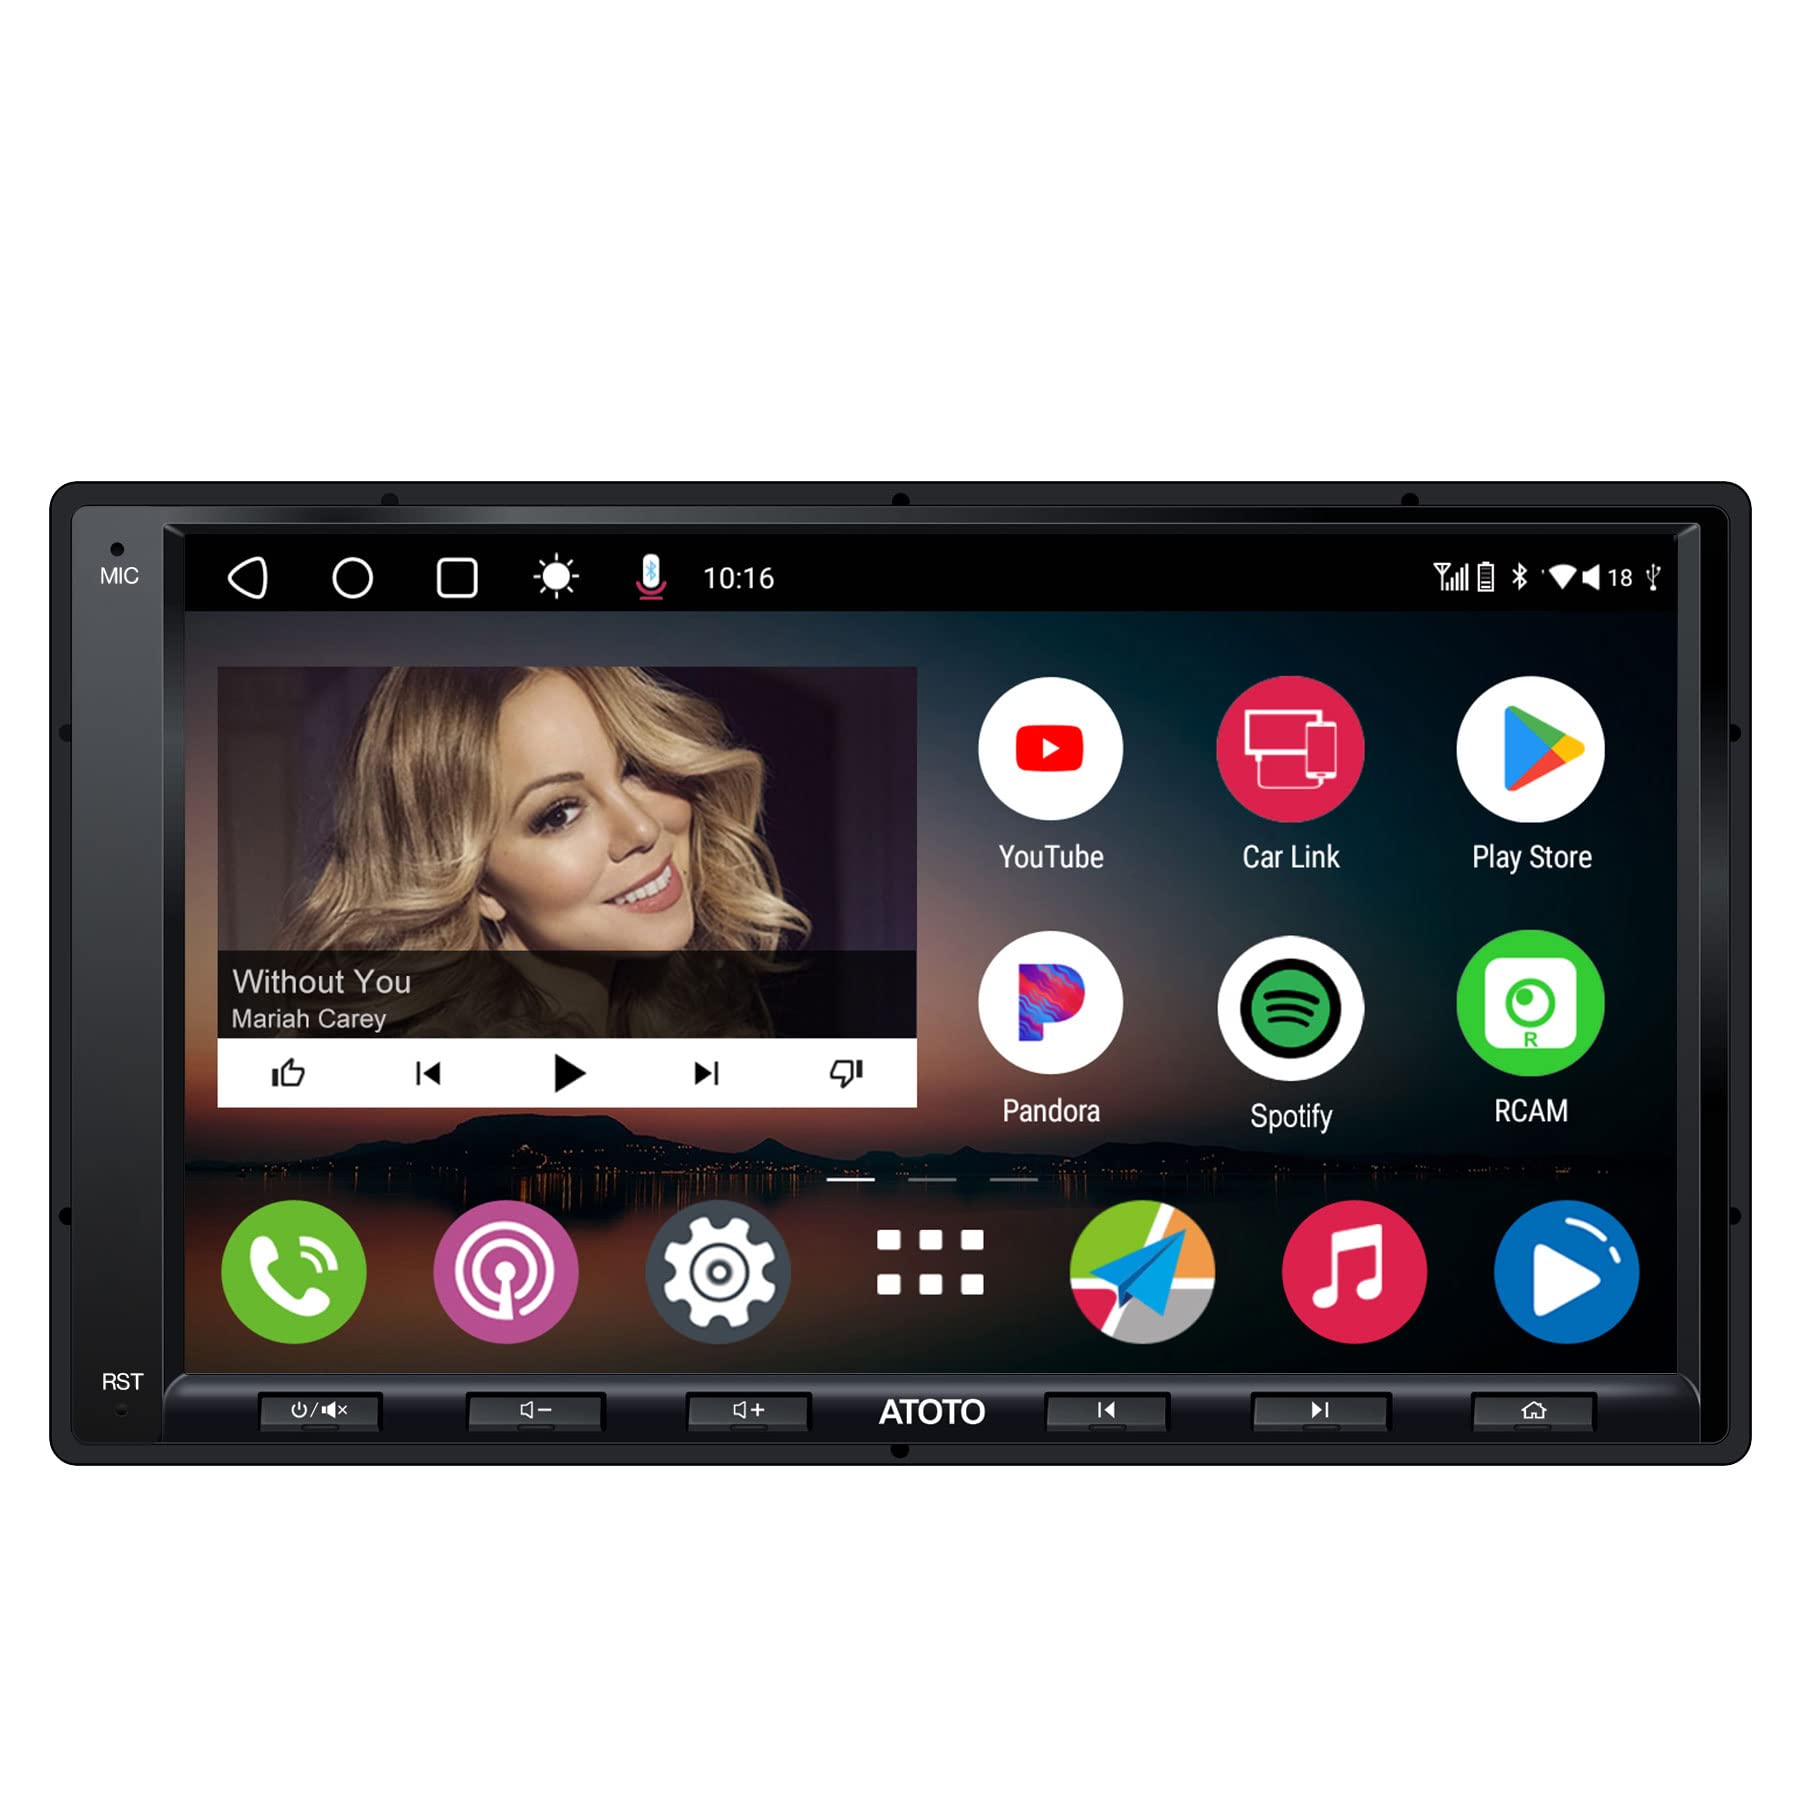 ATOTO A6PF Android Double-DIN Car Stereo-Wireless CarPlay- 2G+32G for $159.92